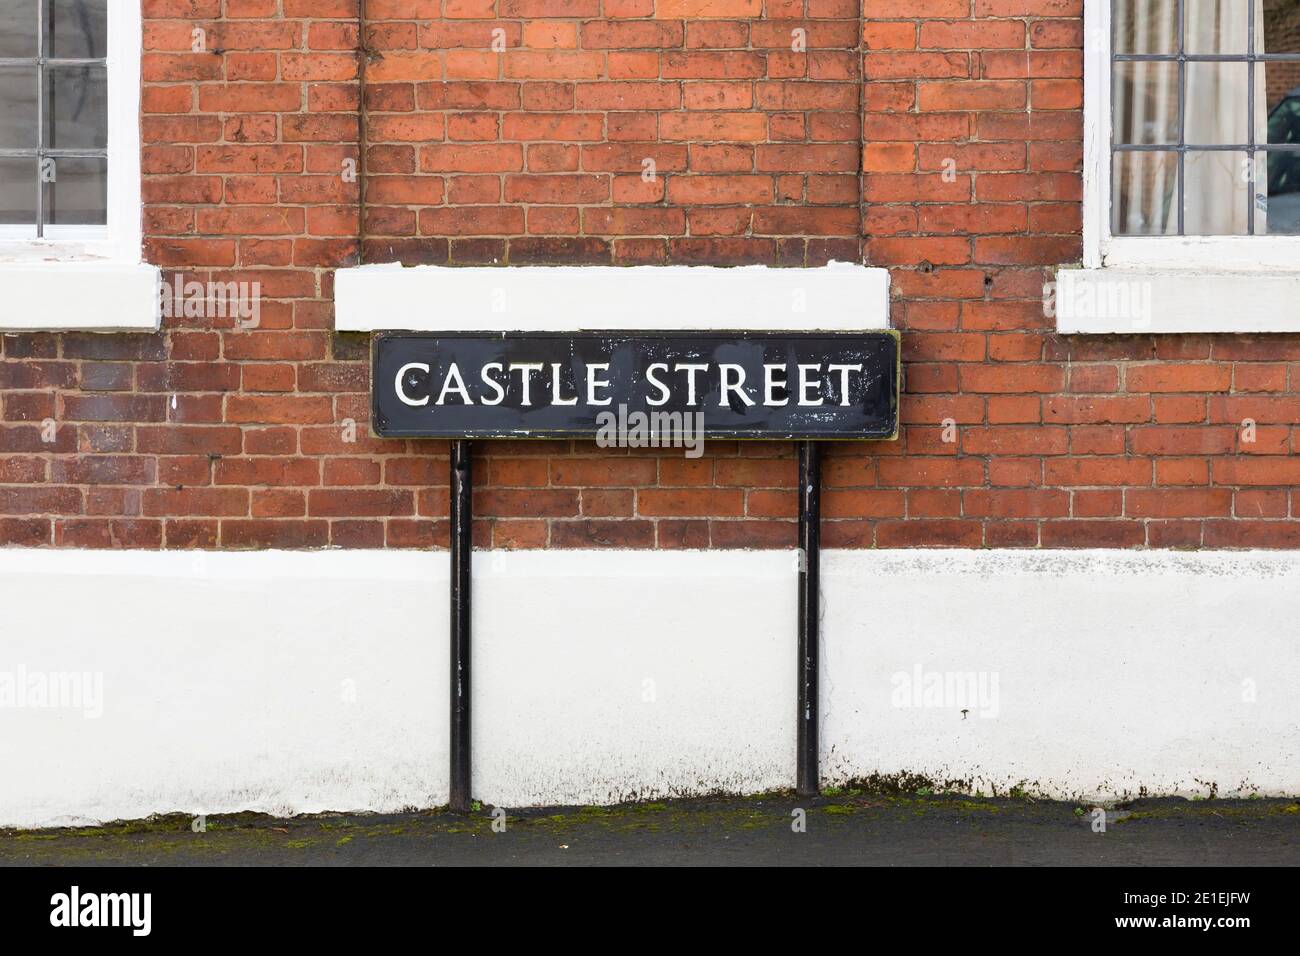 Old metal black and white street sign, Castle Street in Warwick, UK Stock Photo